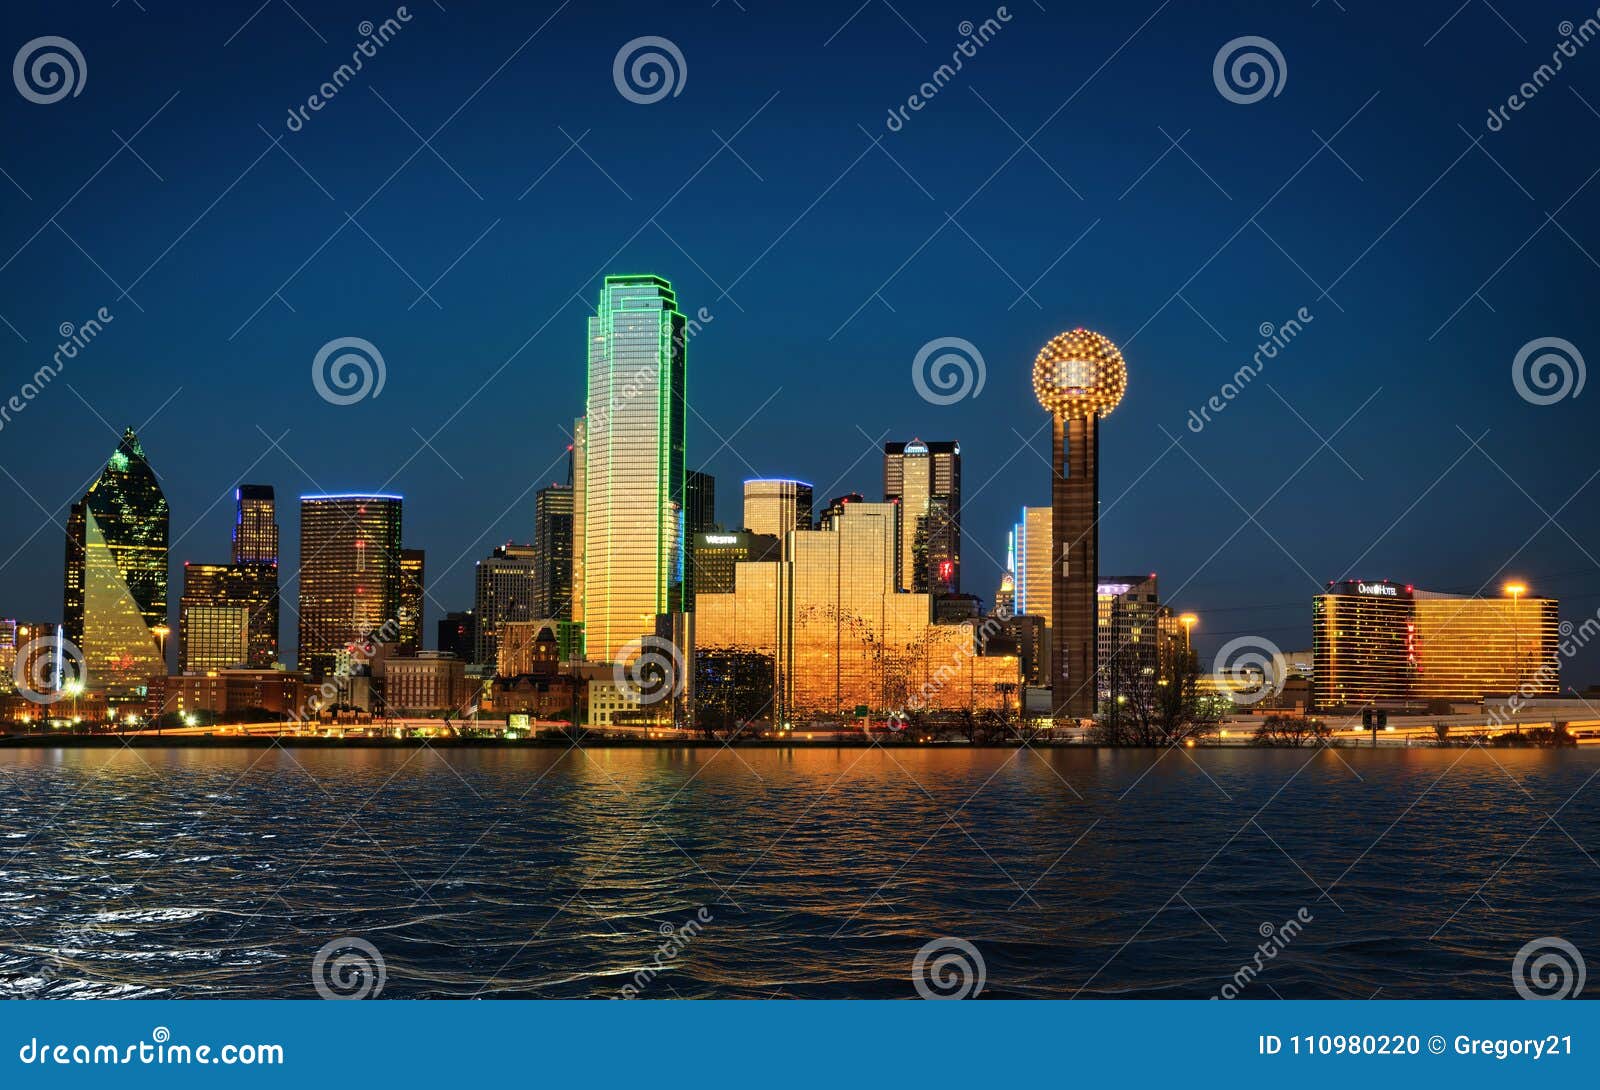 city of downtown dallas texas at dusk